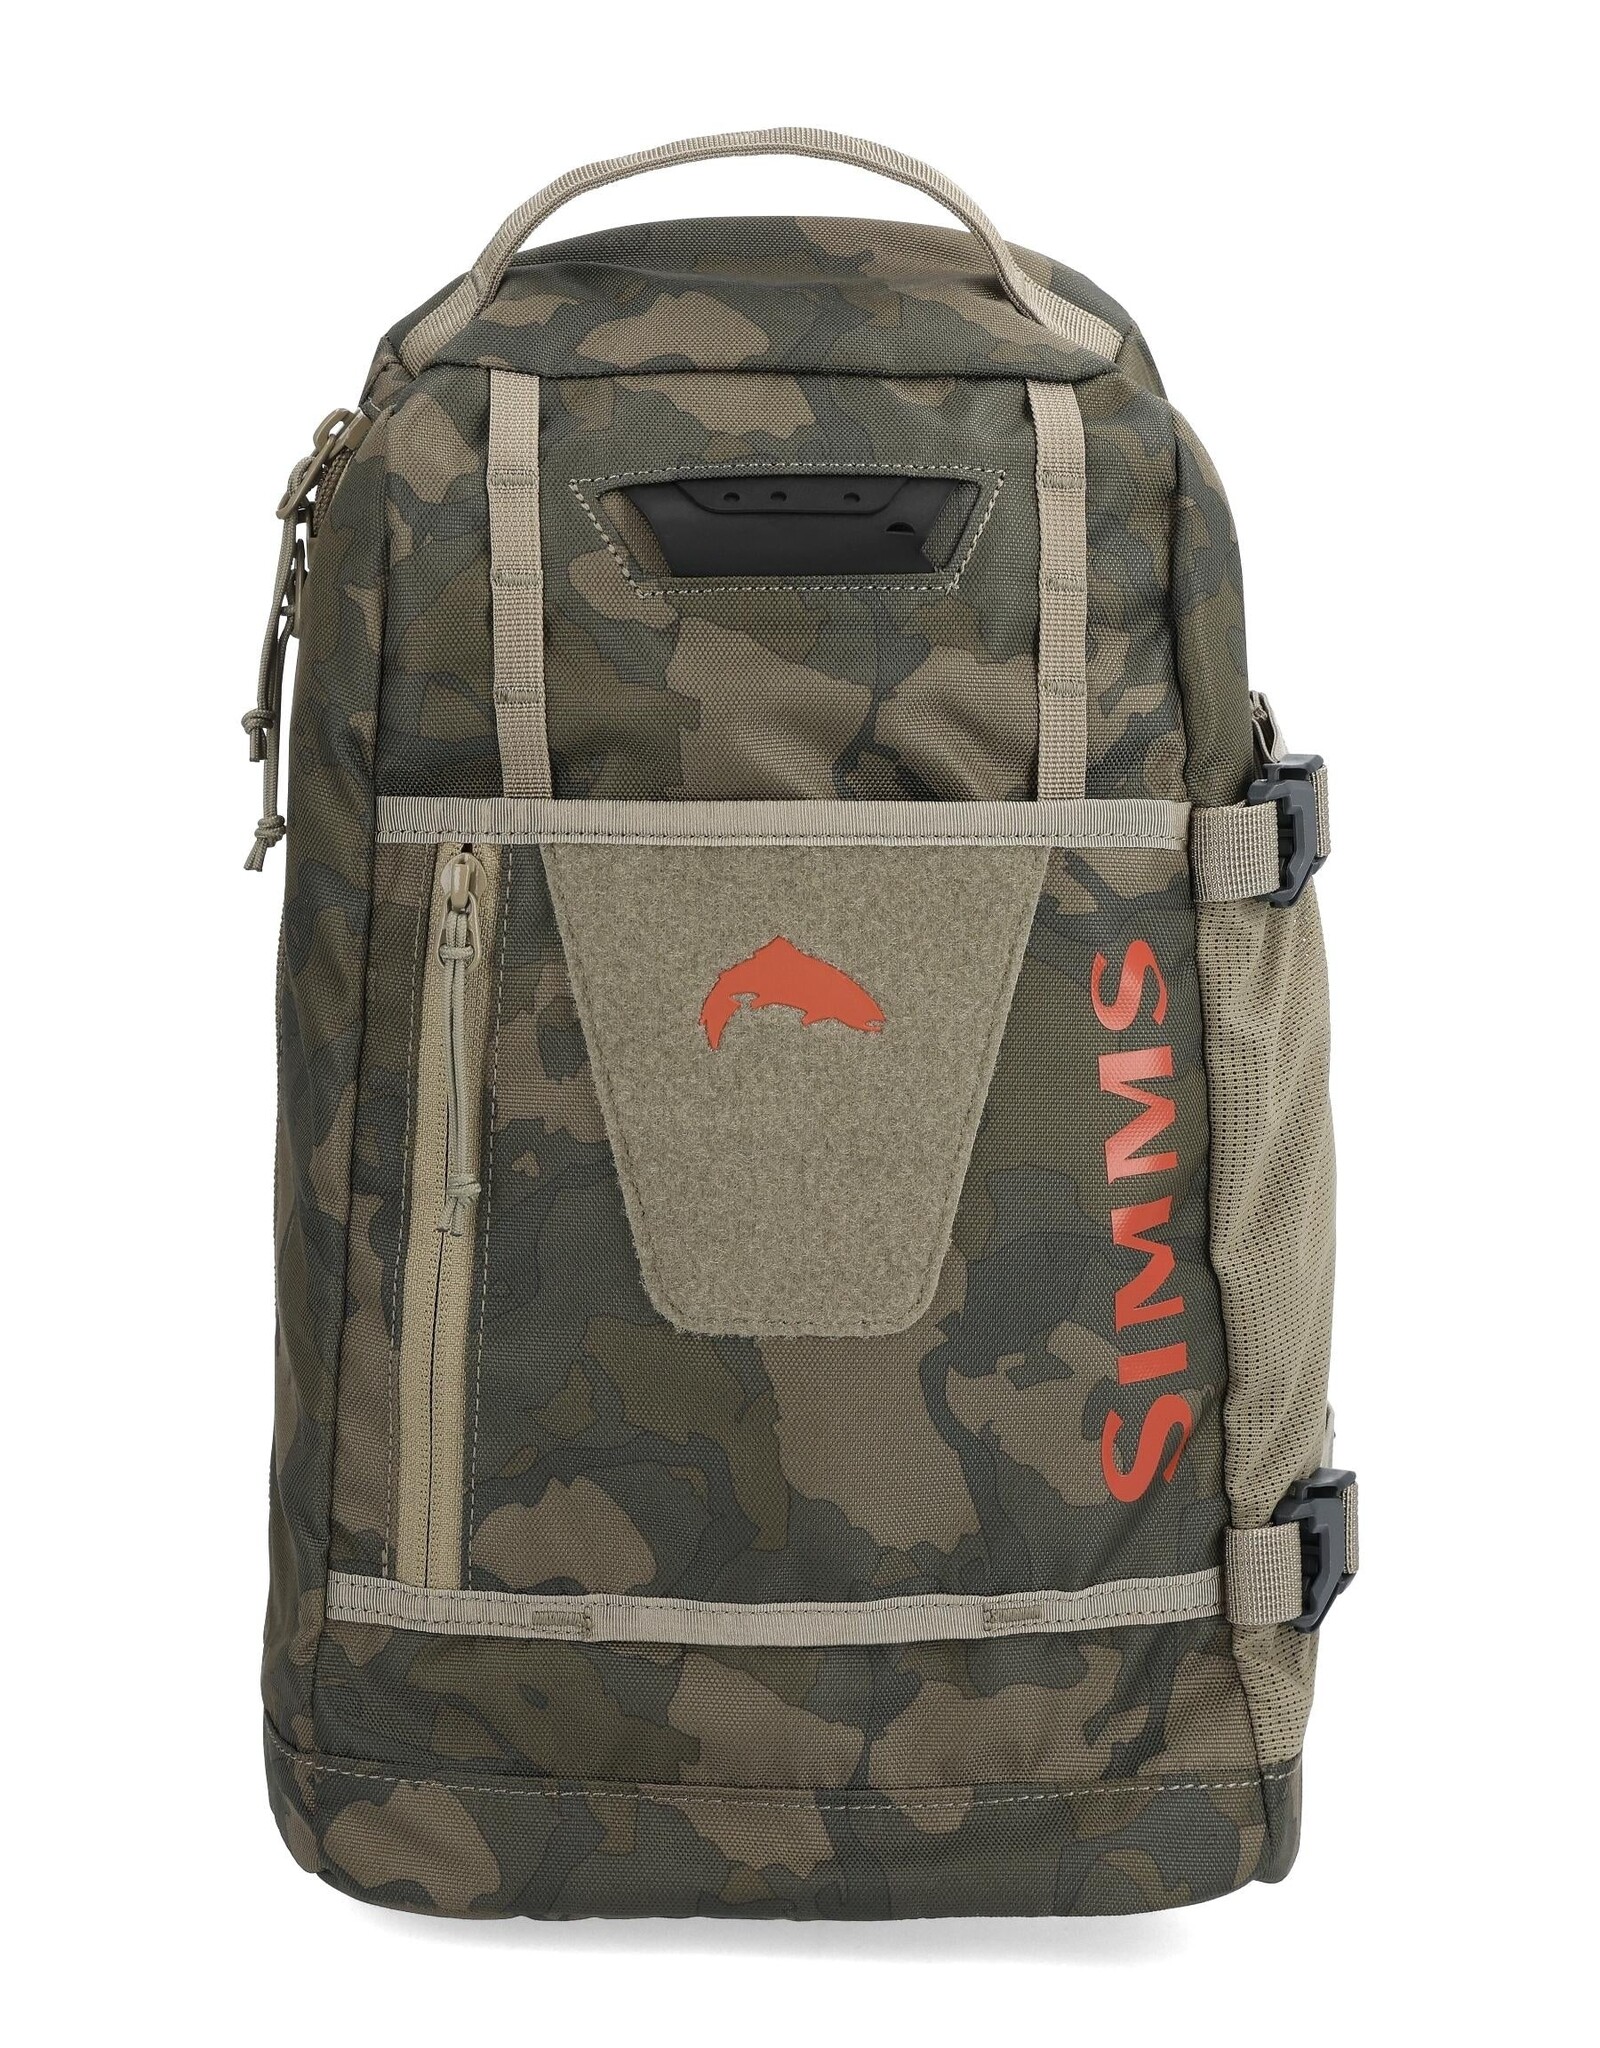 Simms Fishing Tributary Sling Pack - Regiment Camo Olive Drab